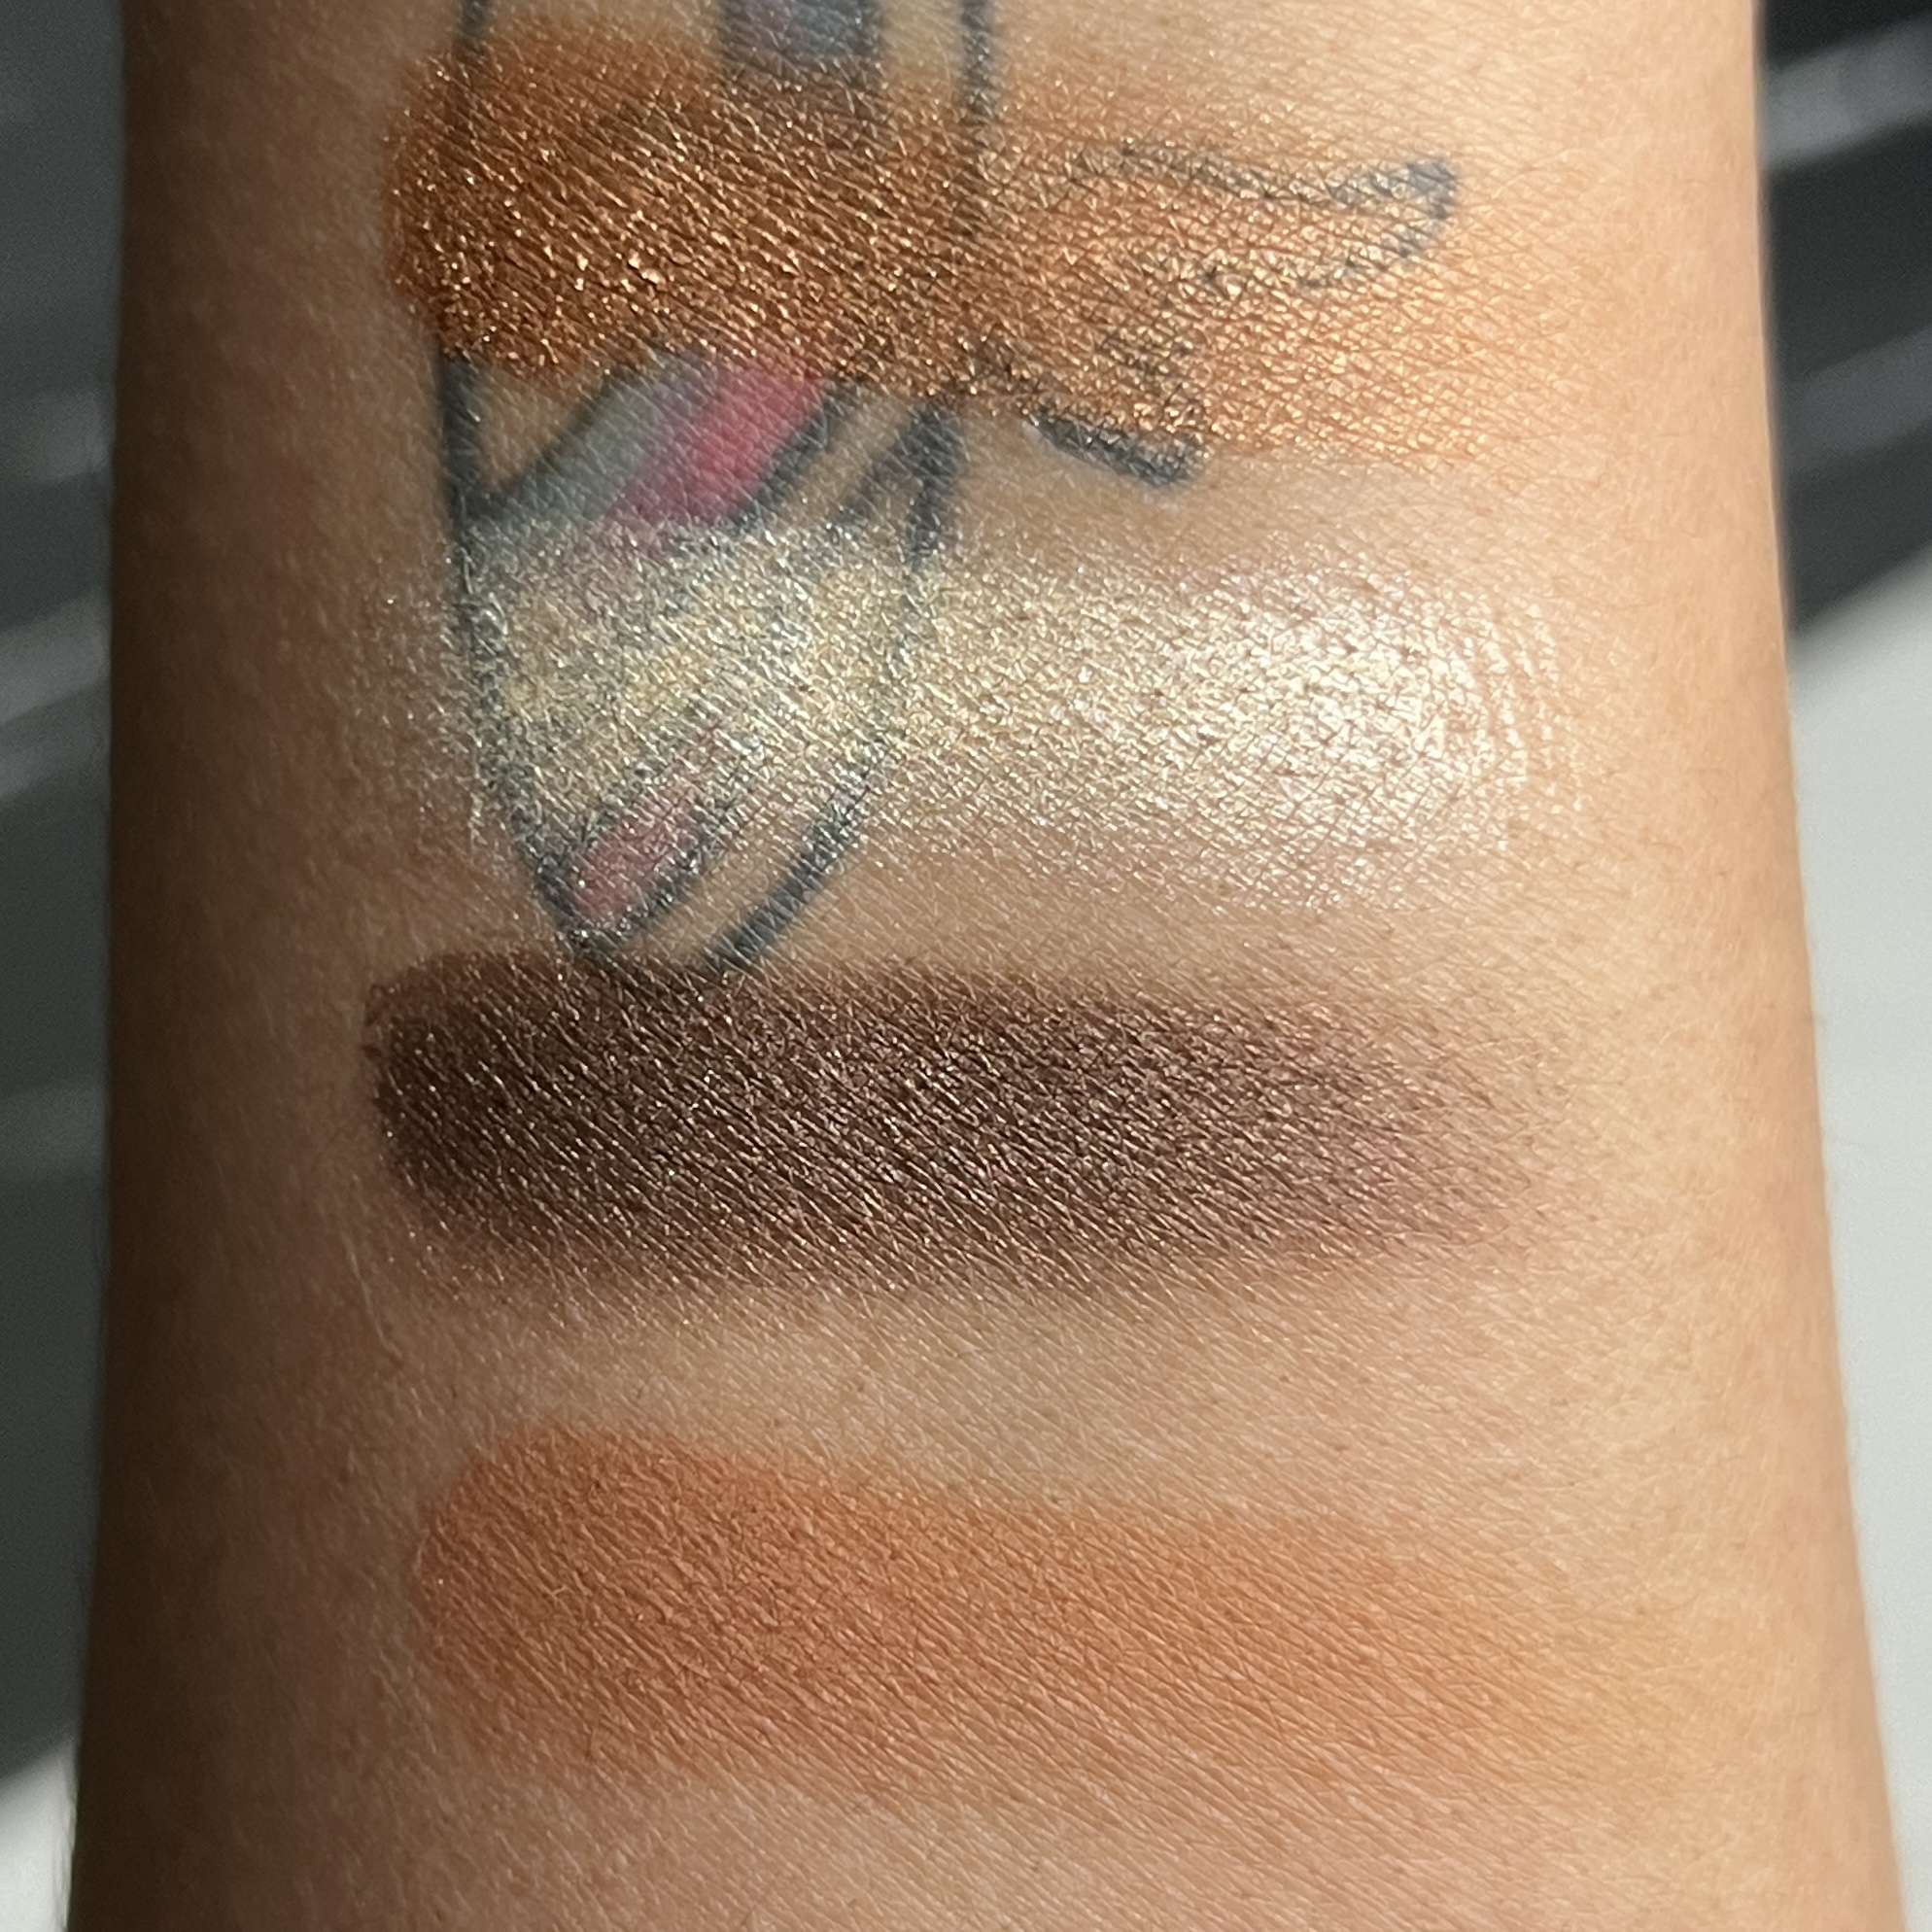 Swatch of Chella Palette for Ipsy Glam Bag October 2022